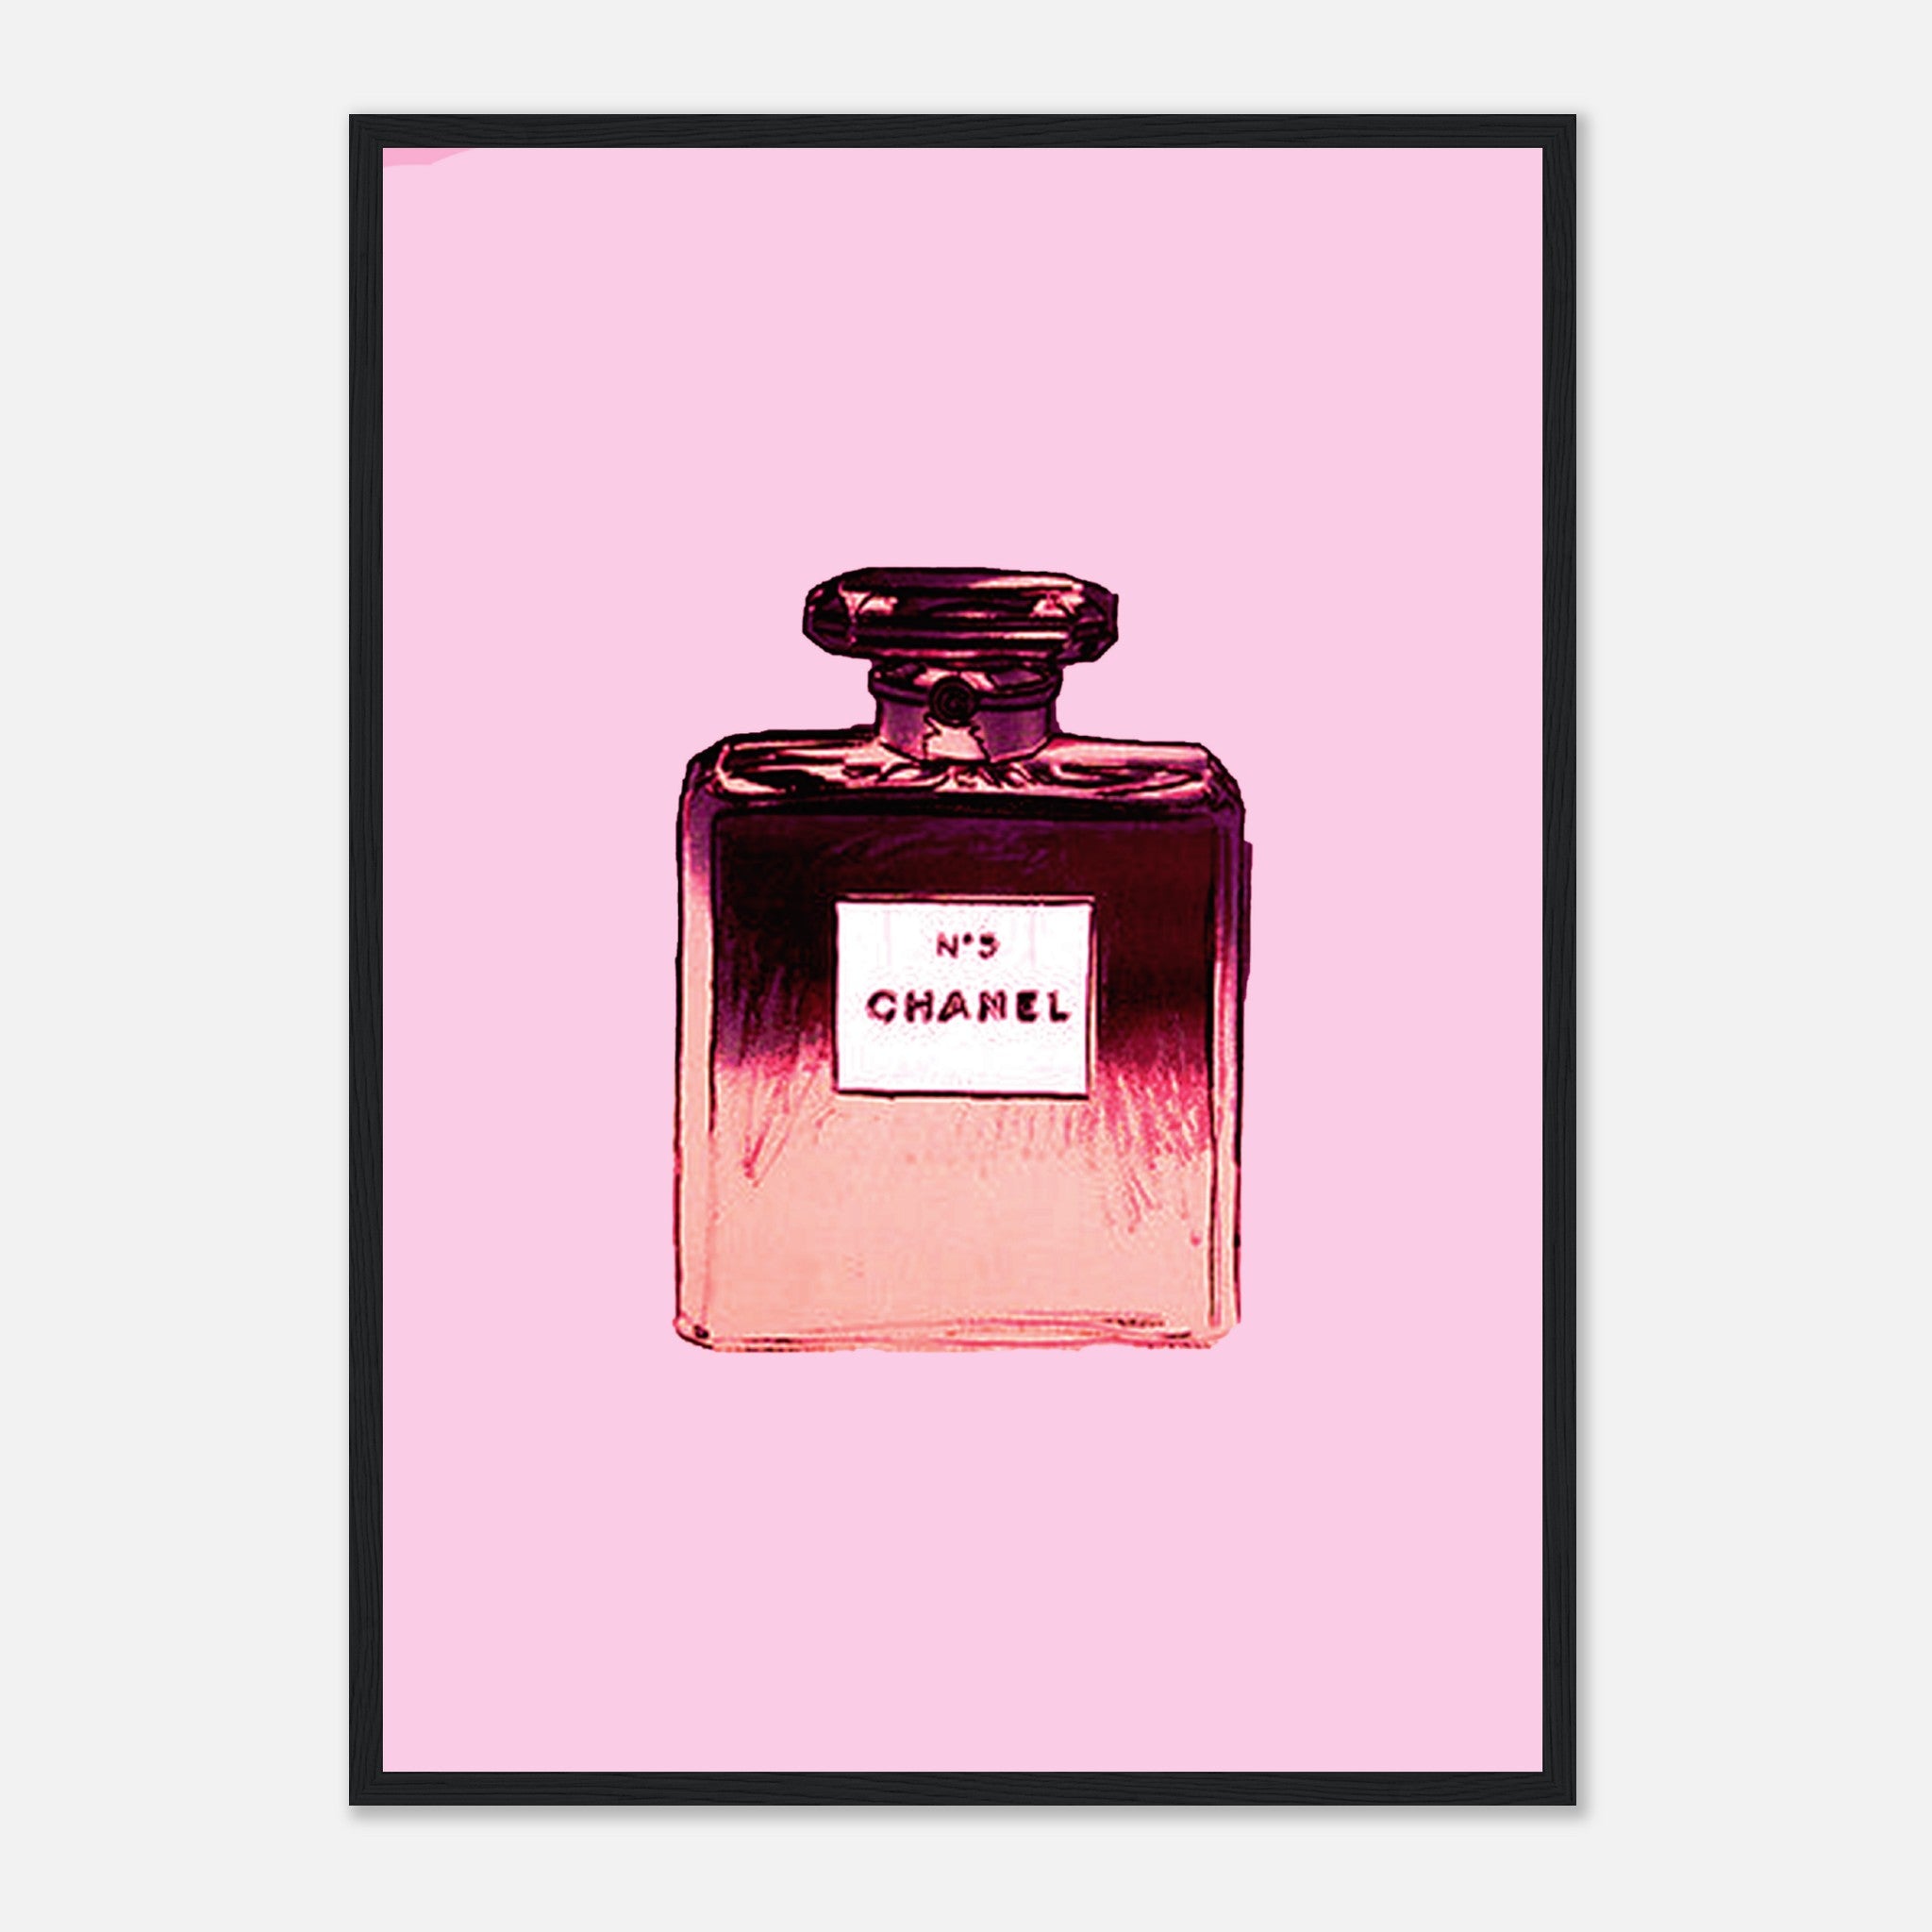 Chanel No5 2 Póster